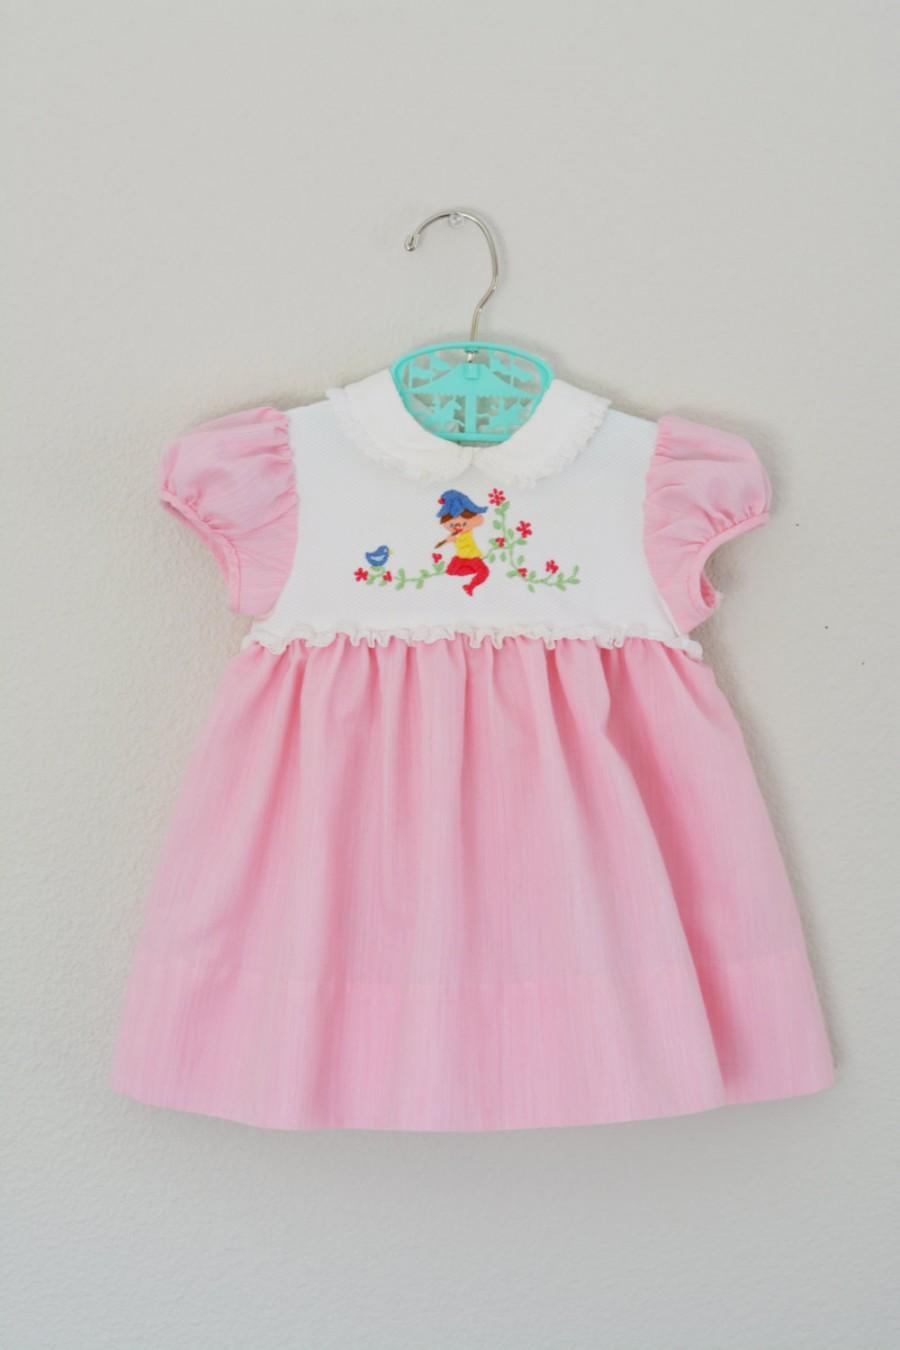 Wedding - Toddler Dress Vintage 70s Baby Clothes